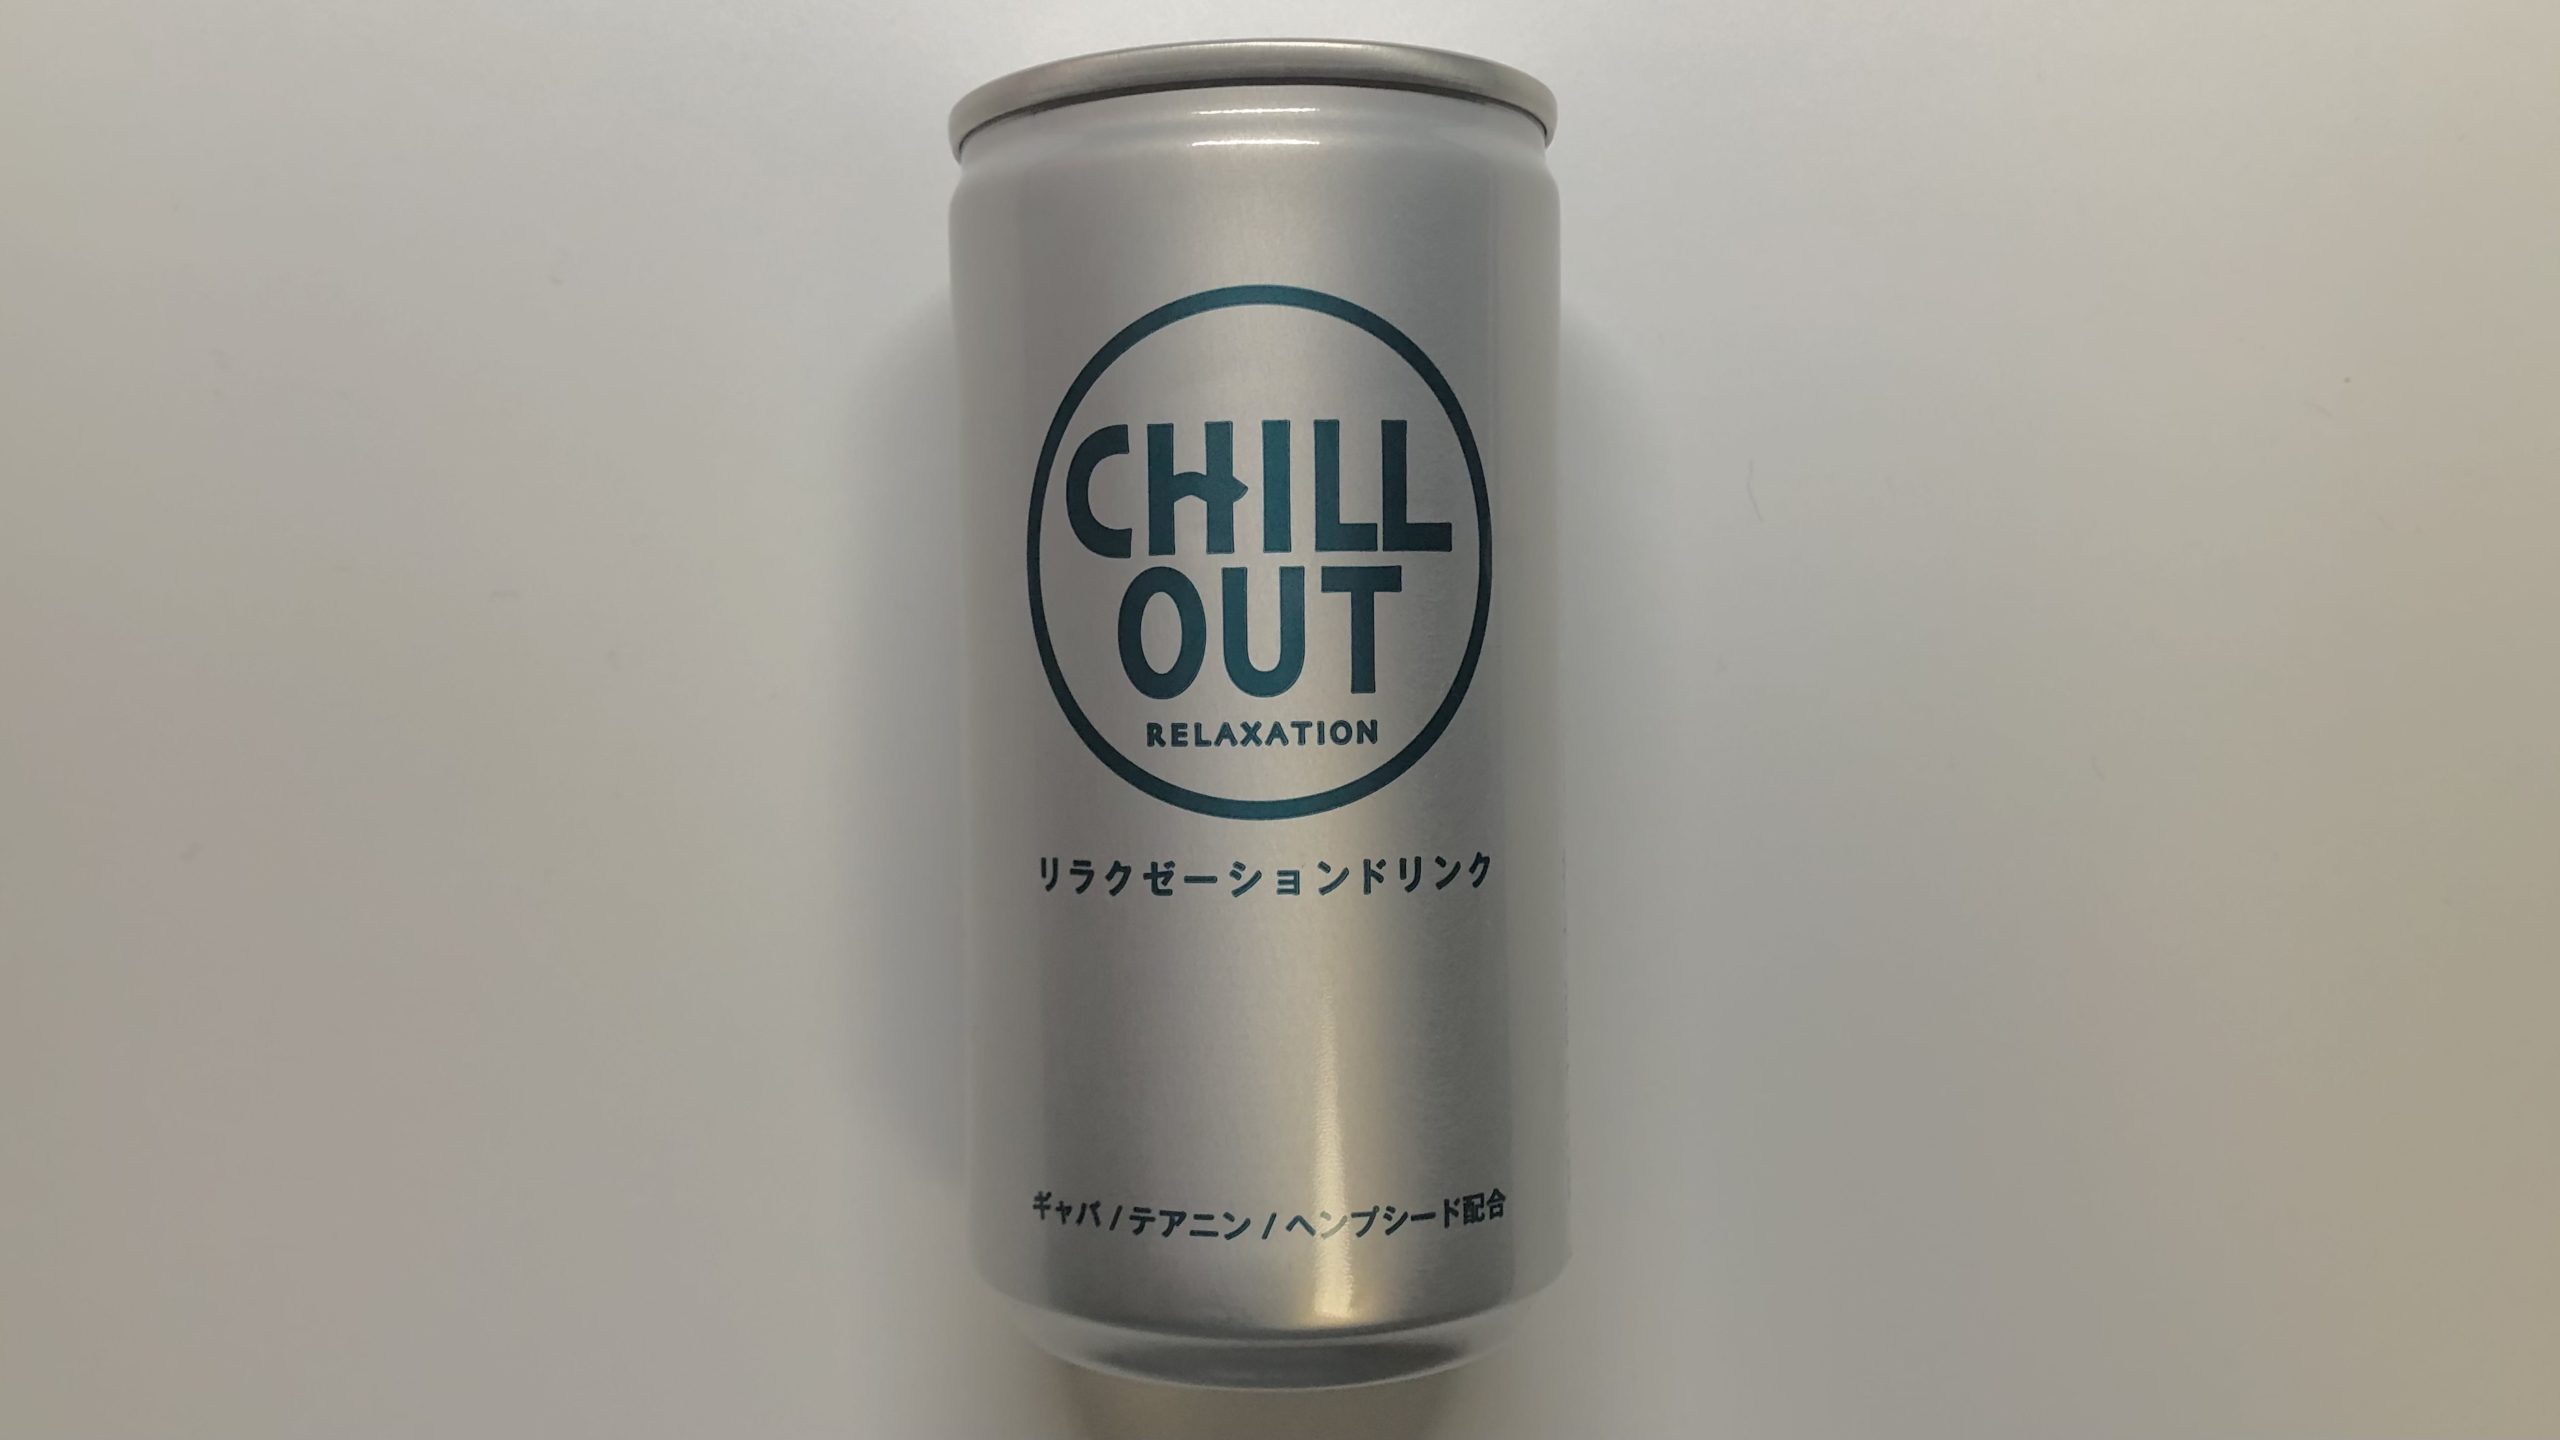 CHILL OUTとは？